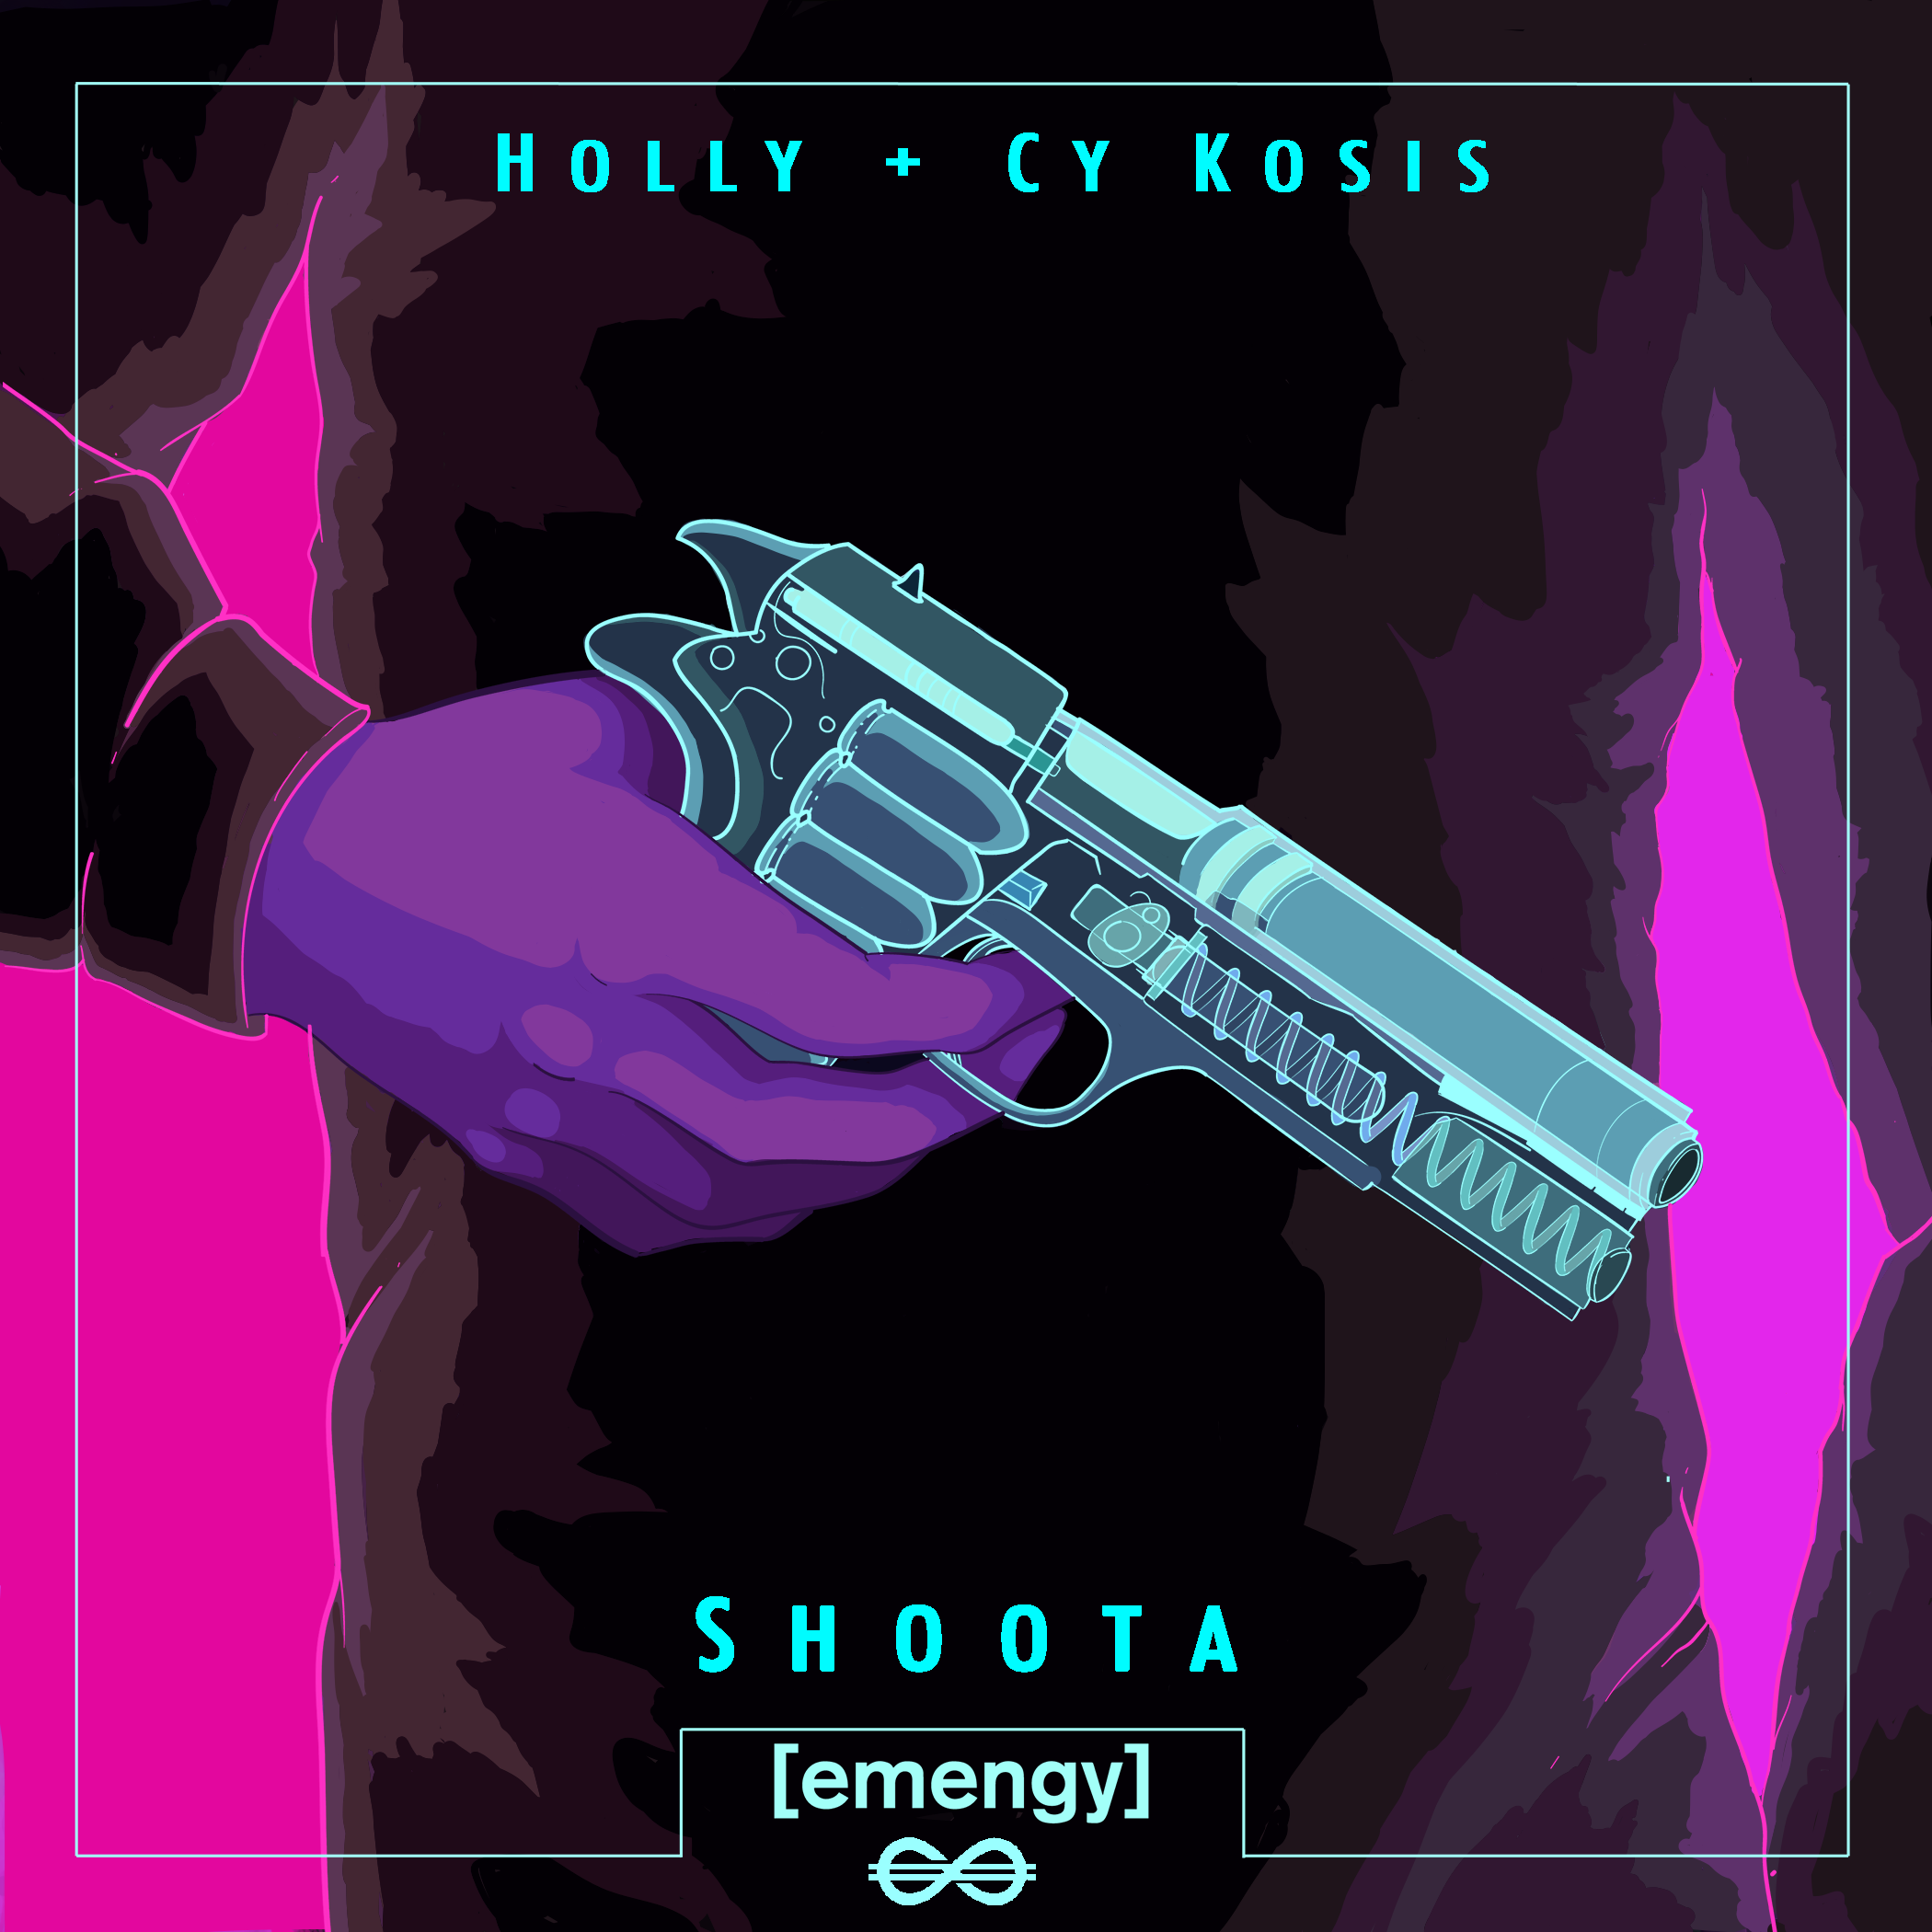 HOLLY + CY KOSIS - SHOOTA  emengyXtrapstyle track art.png